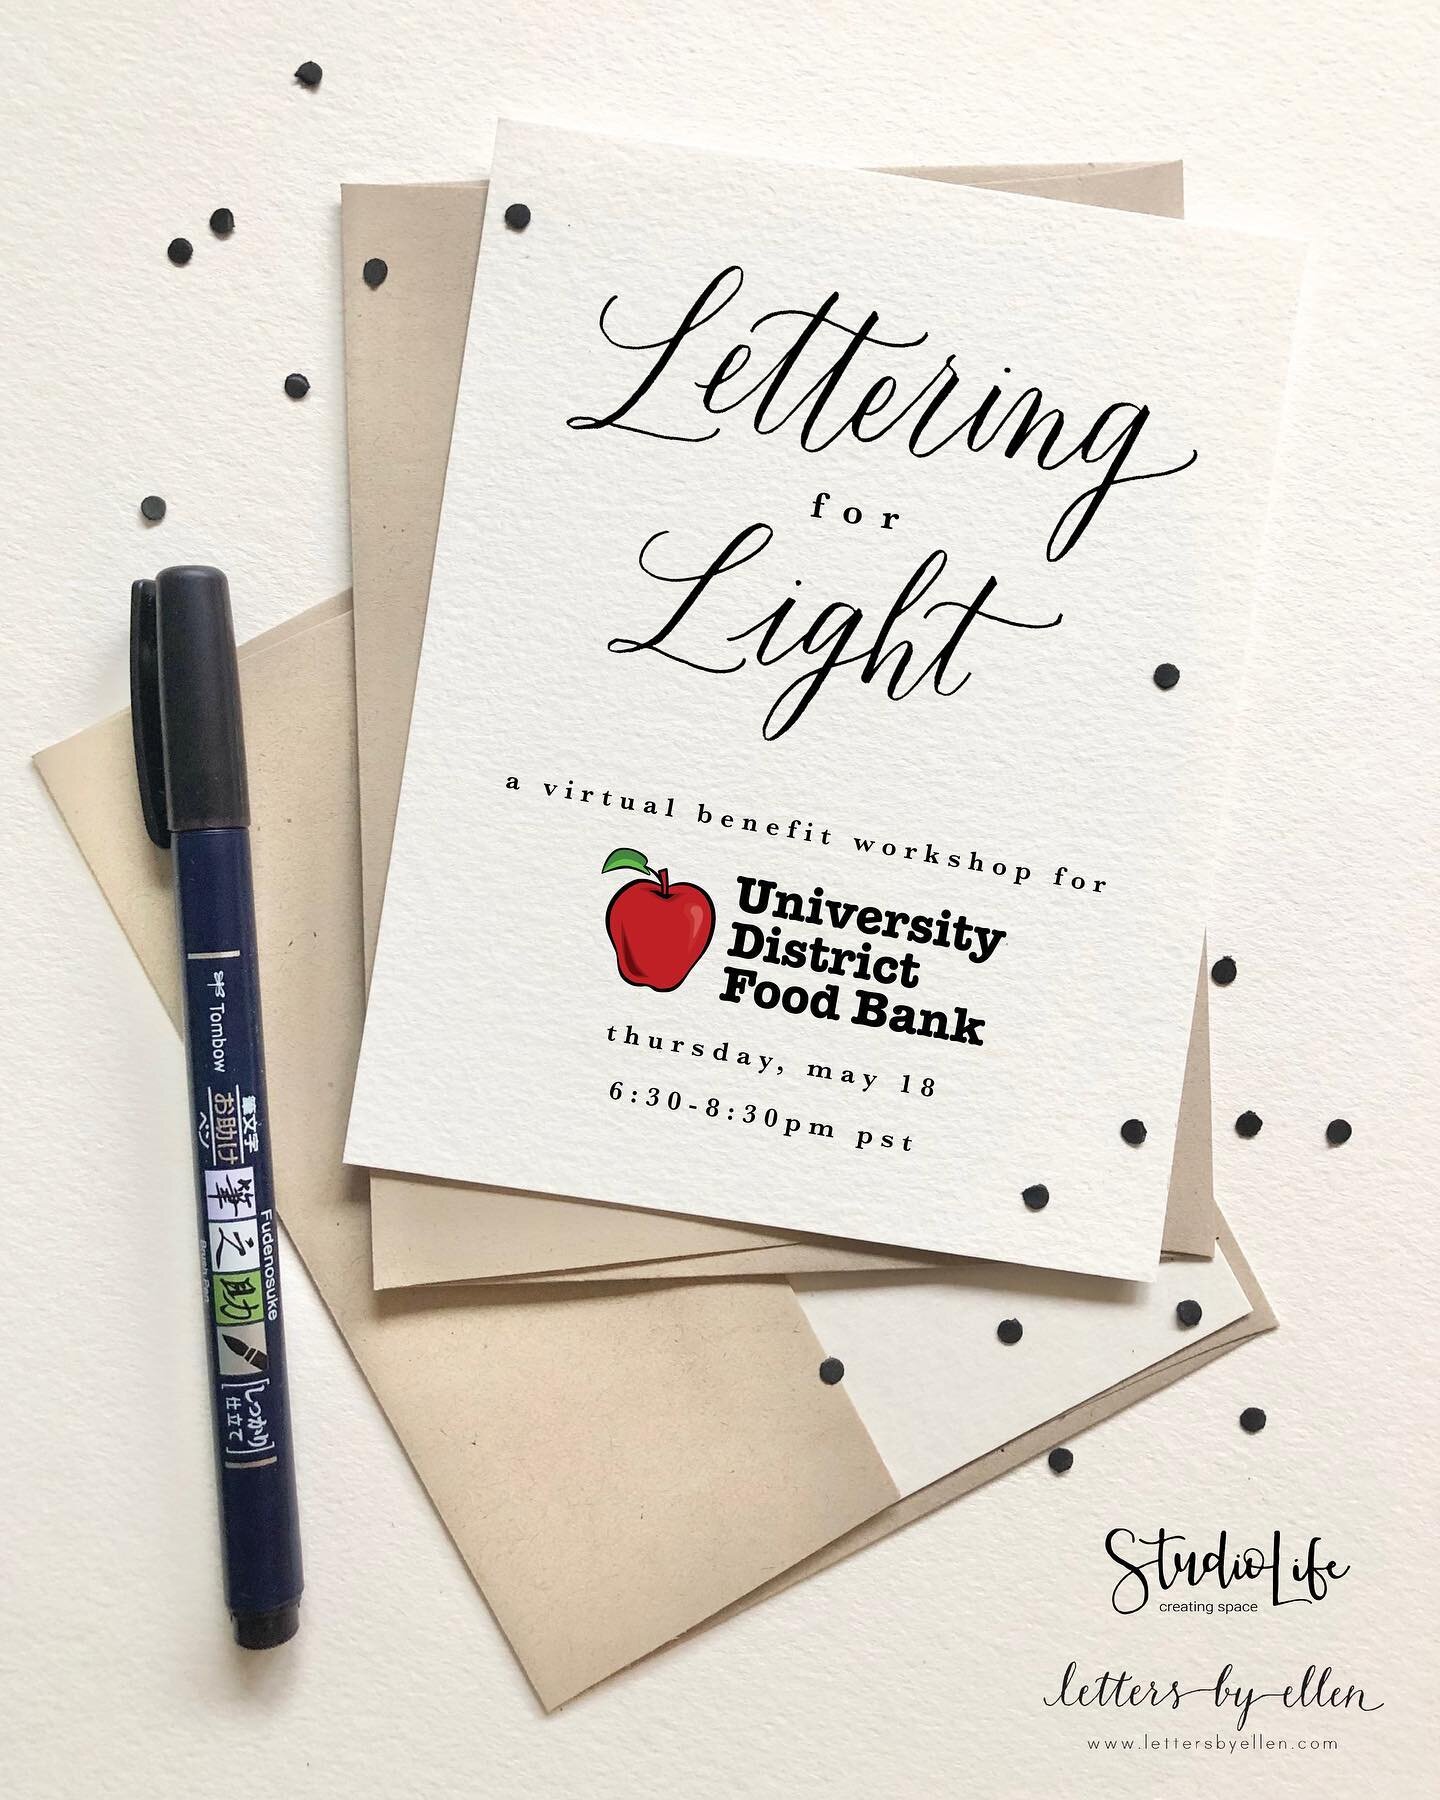 Starting this rainy day off with a little bit of sunshine! I couldn&rsquo;t be more excited to continue the Lettering for Light series in partnership with @studiolifeseattle. Join us on Thursday, May 18 from 6:30-8:30pm for a virtual benefit for the 